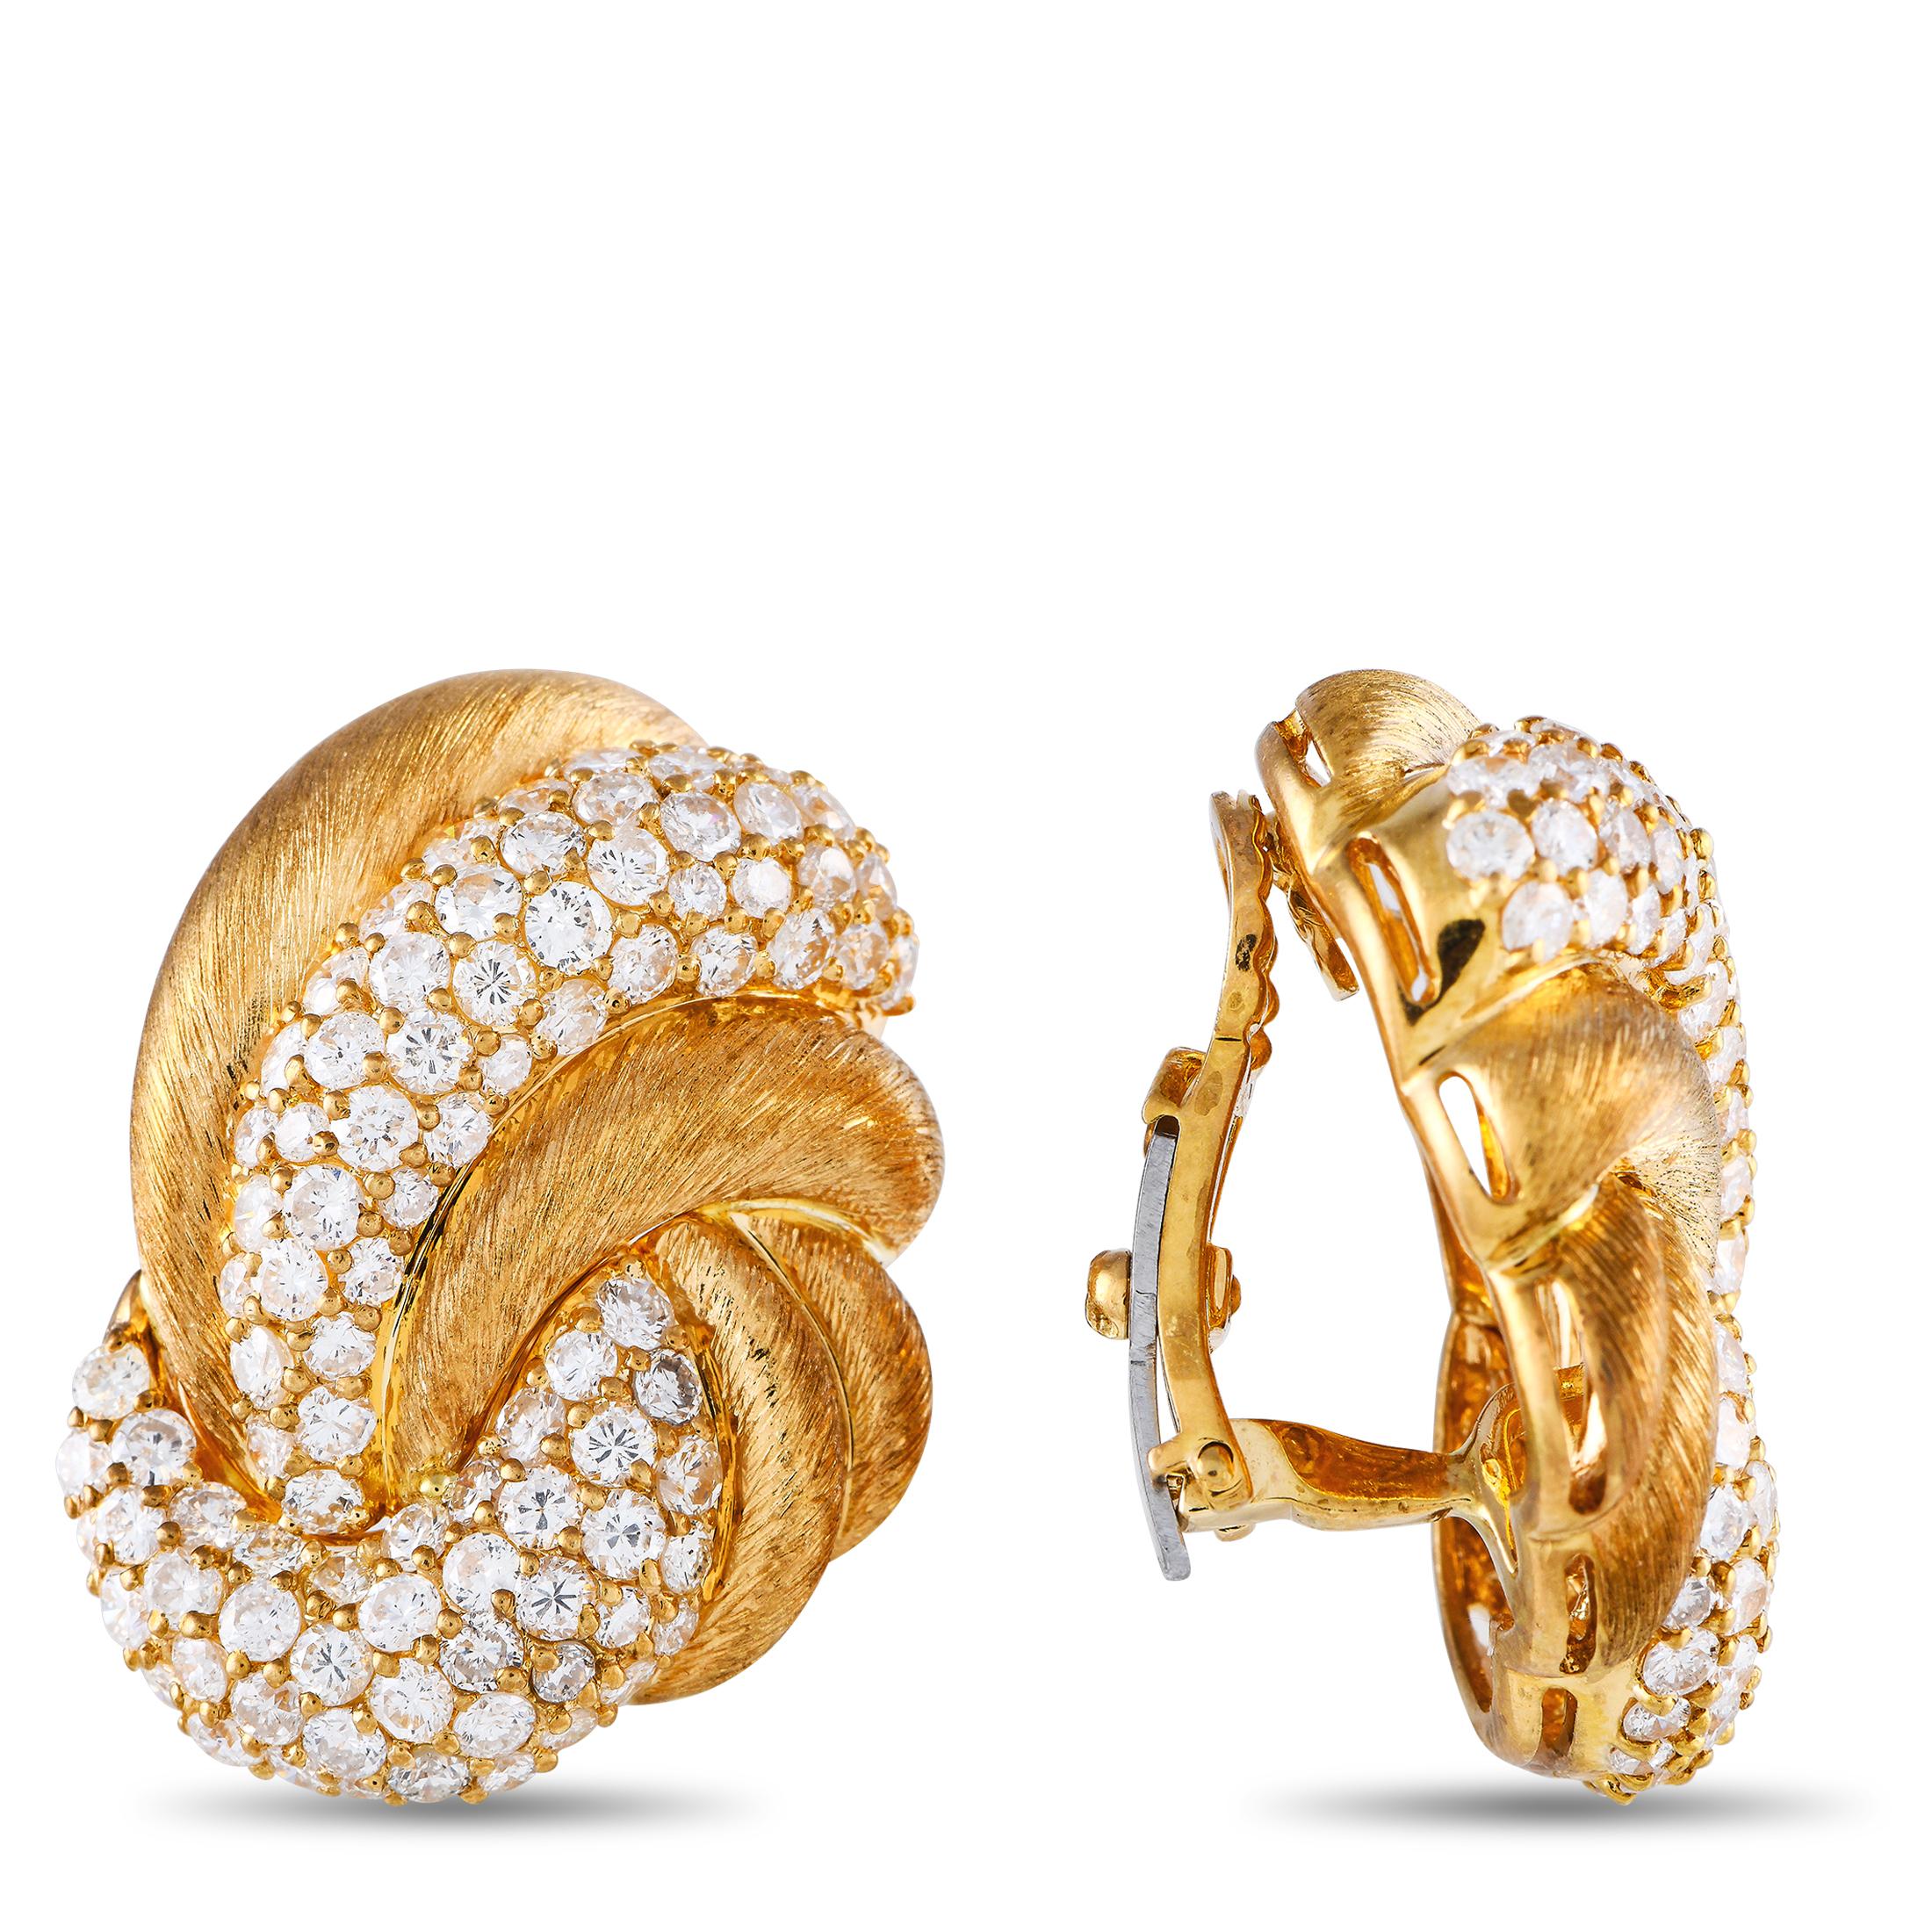 Elevate your jewelry game with this gorgeous Bucherer piece. The earrings are fashioned in 18K yellow gold and feature a shell-like silhouette. The textured finish and the swirling clusters of diamonds lend depth, dimension, and dazzling sparkle to